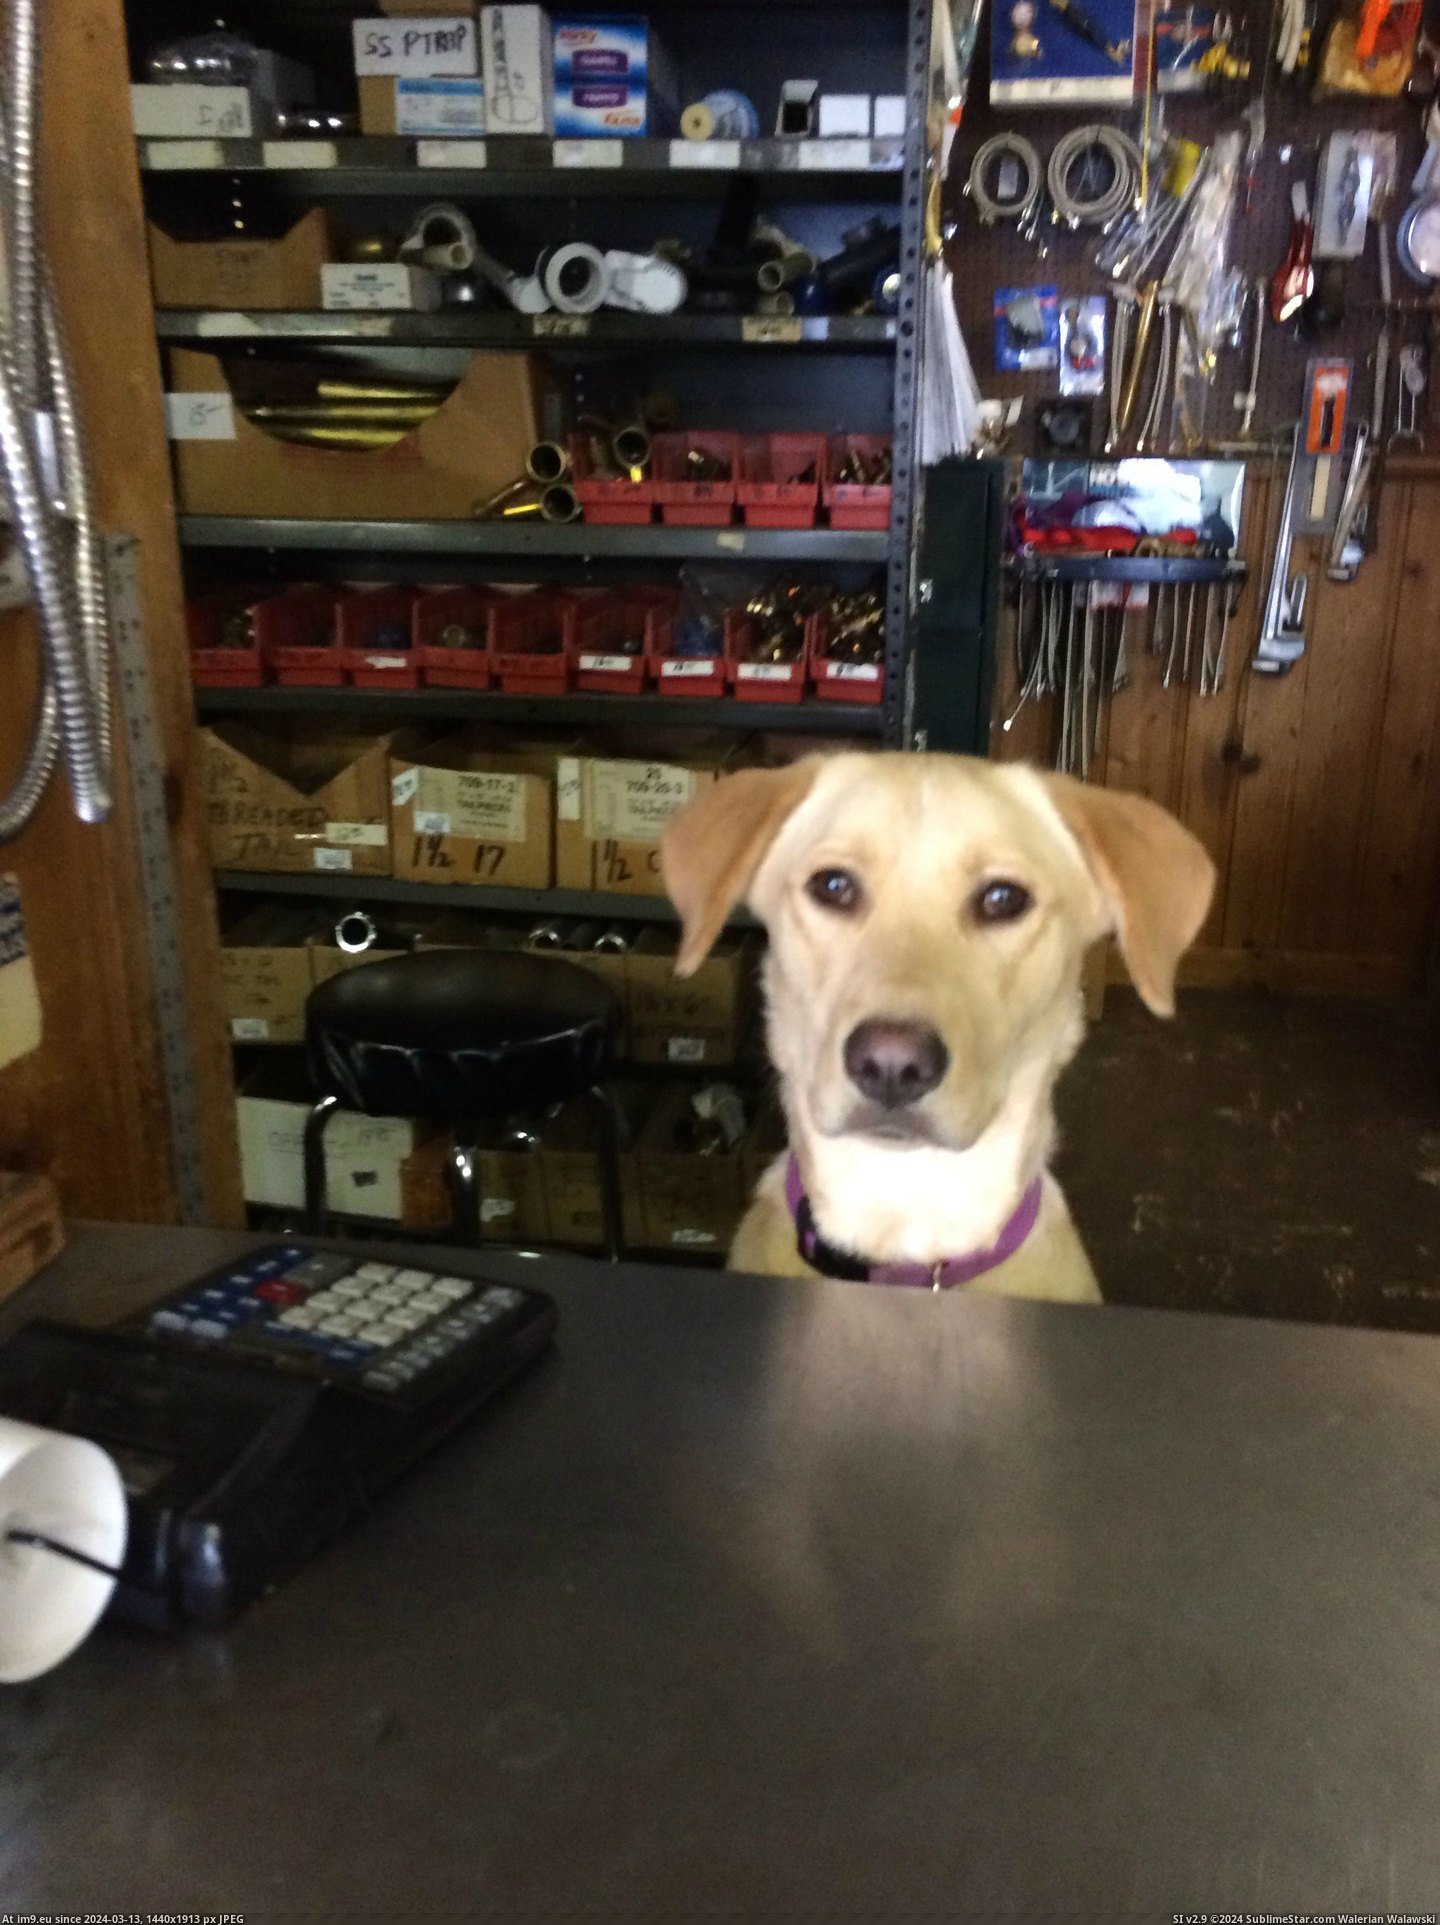 #High #She #Bit #Local #Plumbing #Bearable #Greeter #Store #Official #Supply #Prices [Aww] This is the official greeter at the local plumbing supply store. She makes the high prices a bit more bearable, at least. Pic. (Bild von album My r/AWW favs))